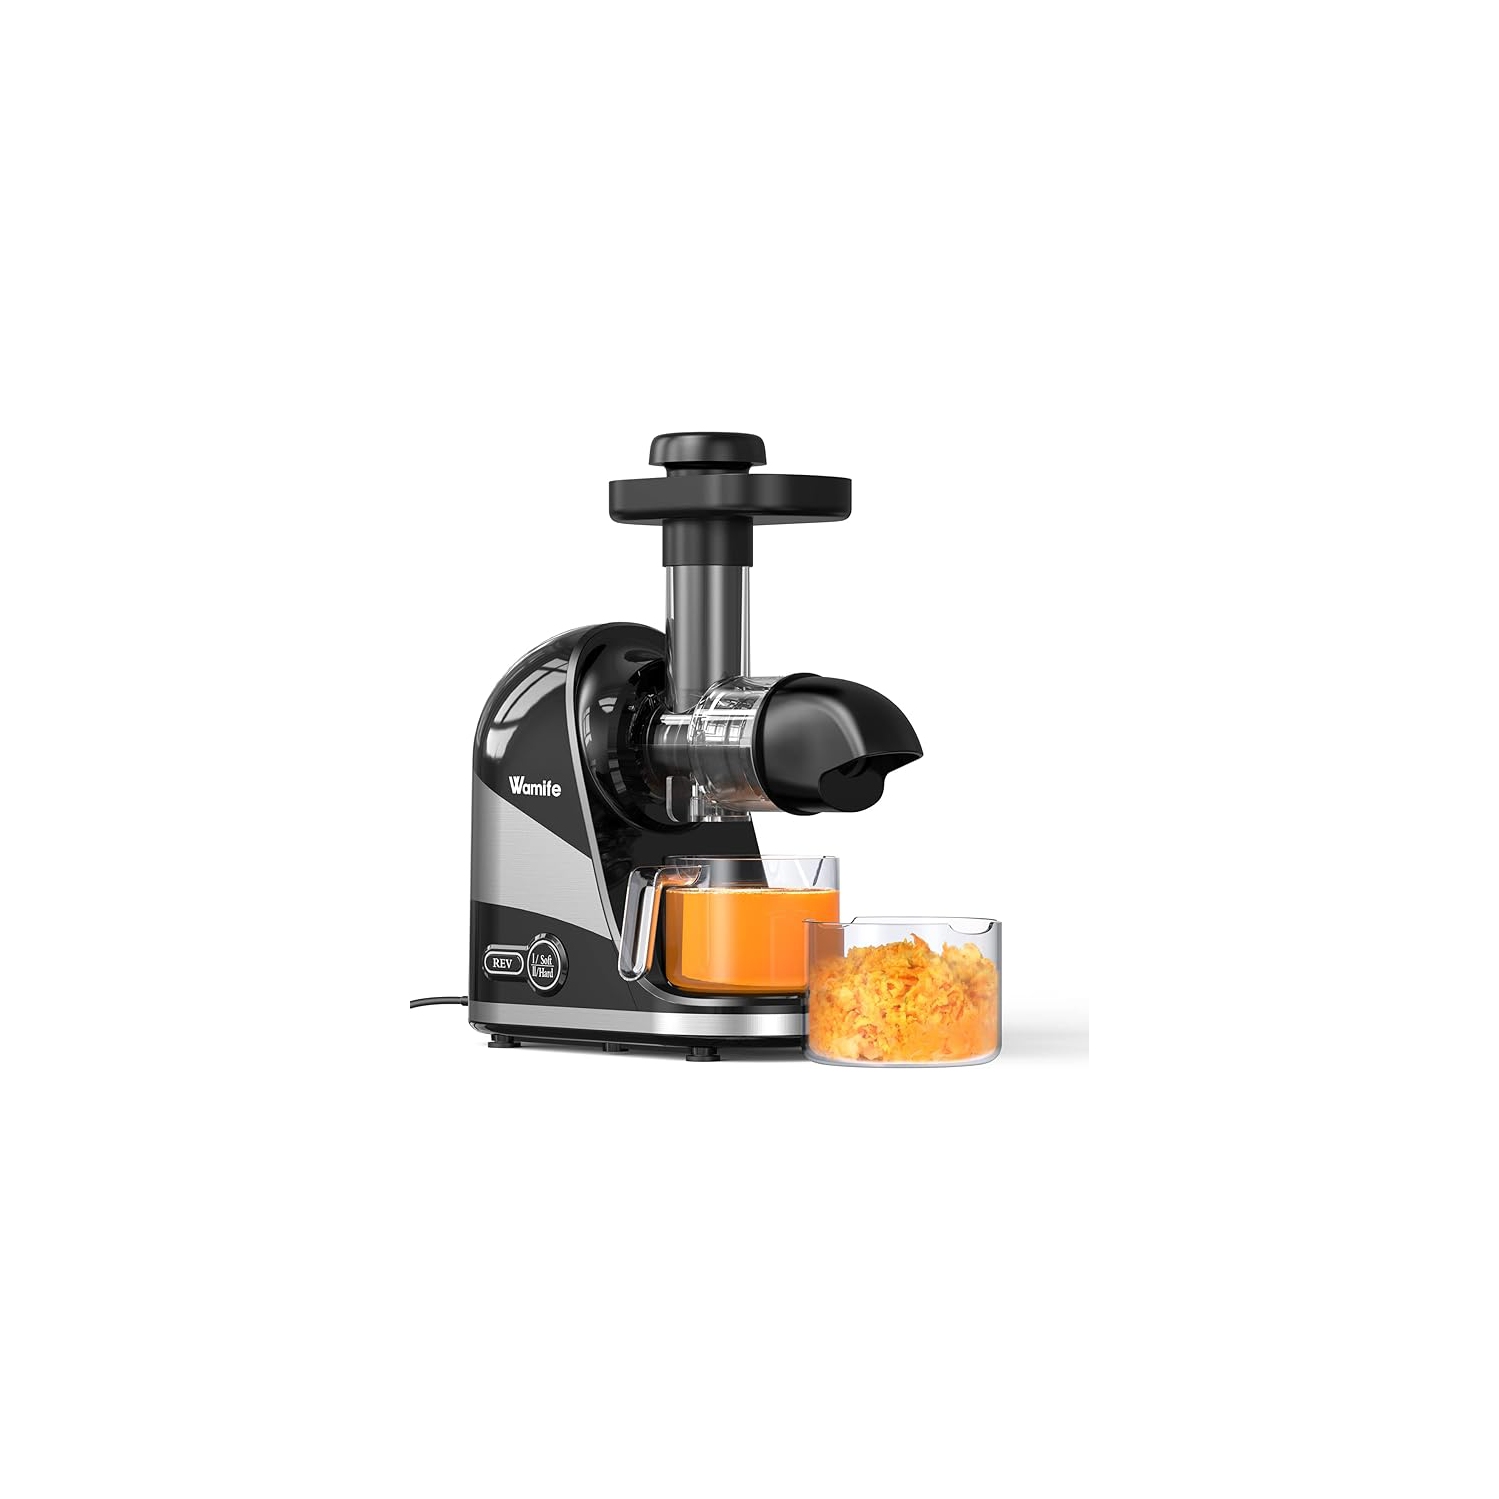 Wamife Slow Masticating Juicer Machine, Cold Press Juicer Extractor, 2 Modes & Reverse Function